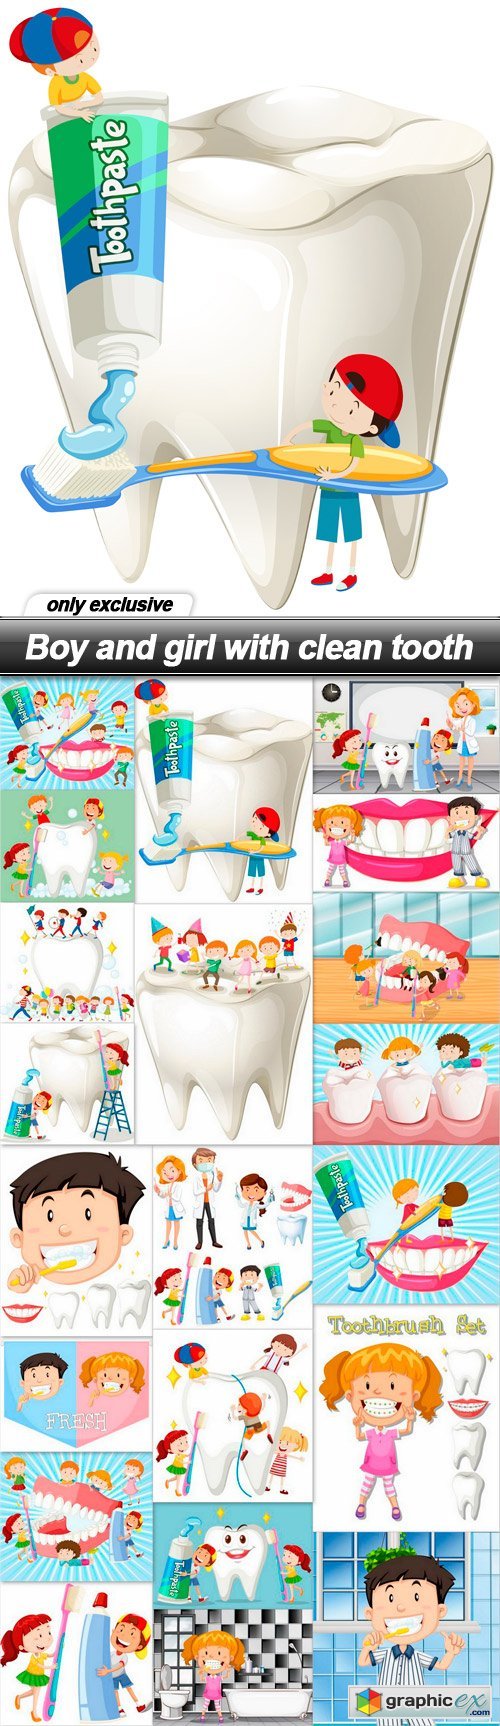 Boy and girl with clean tooth - 21 EPS